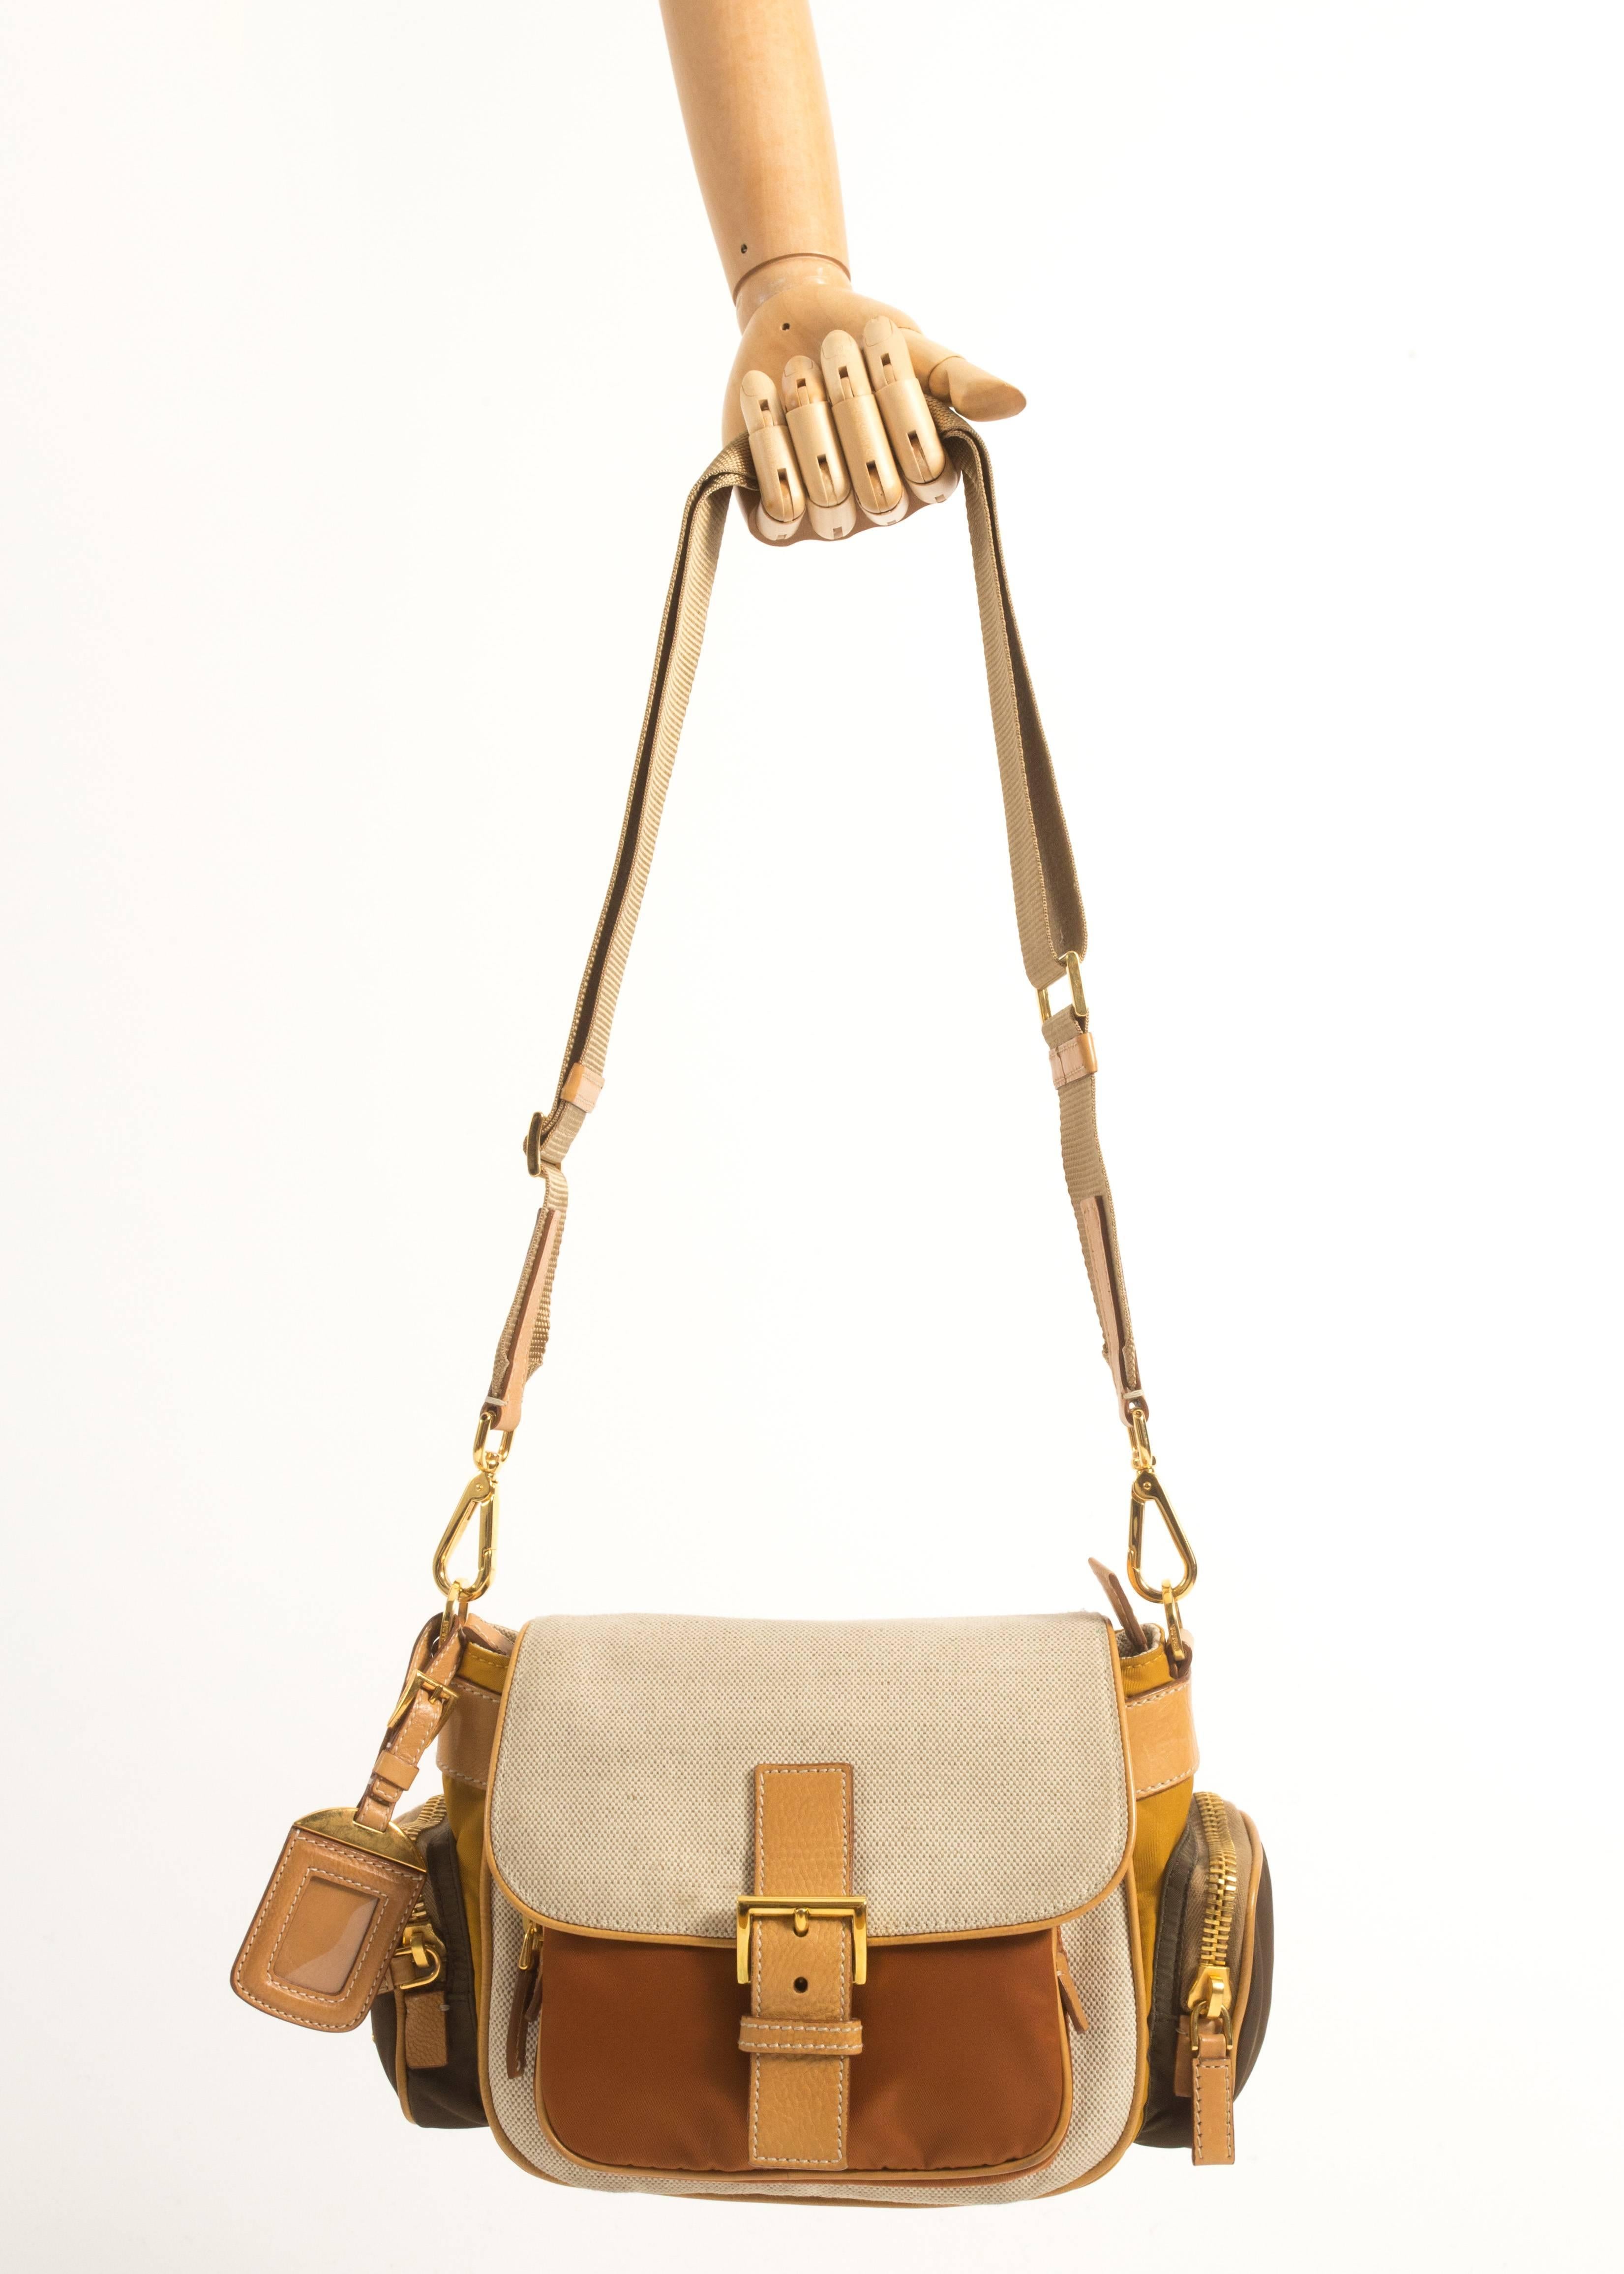 Prada leather, canvas and nylon crossbody bag with adjustable shoulder strap, gold hardware and zip closures